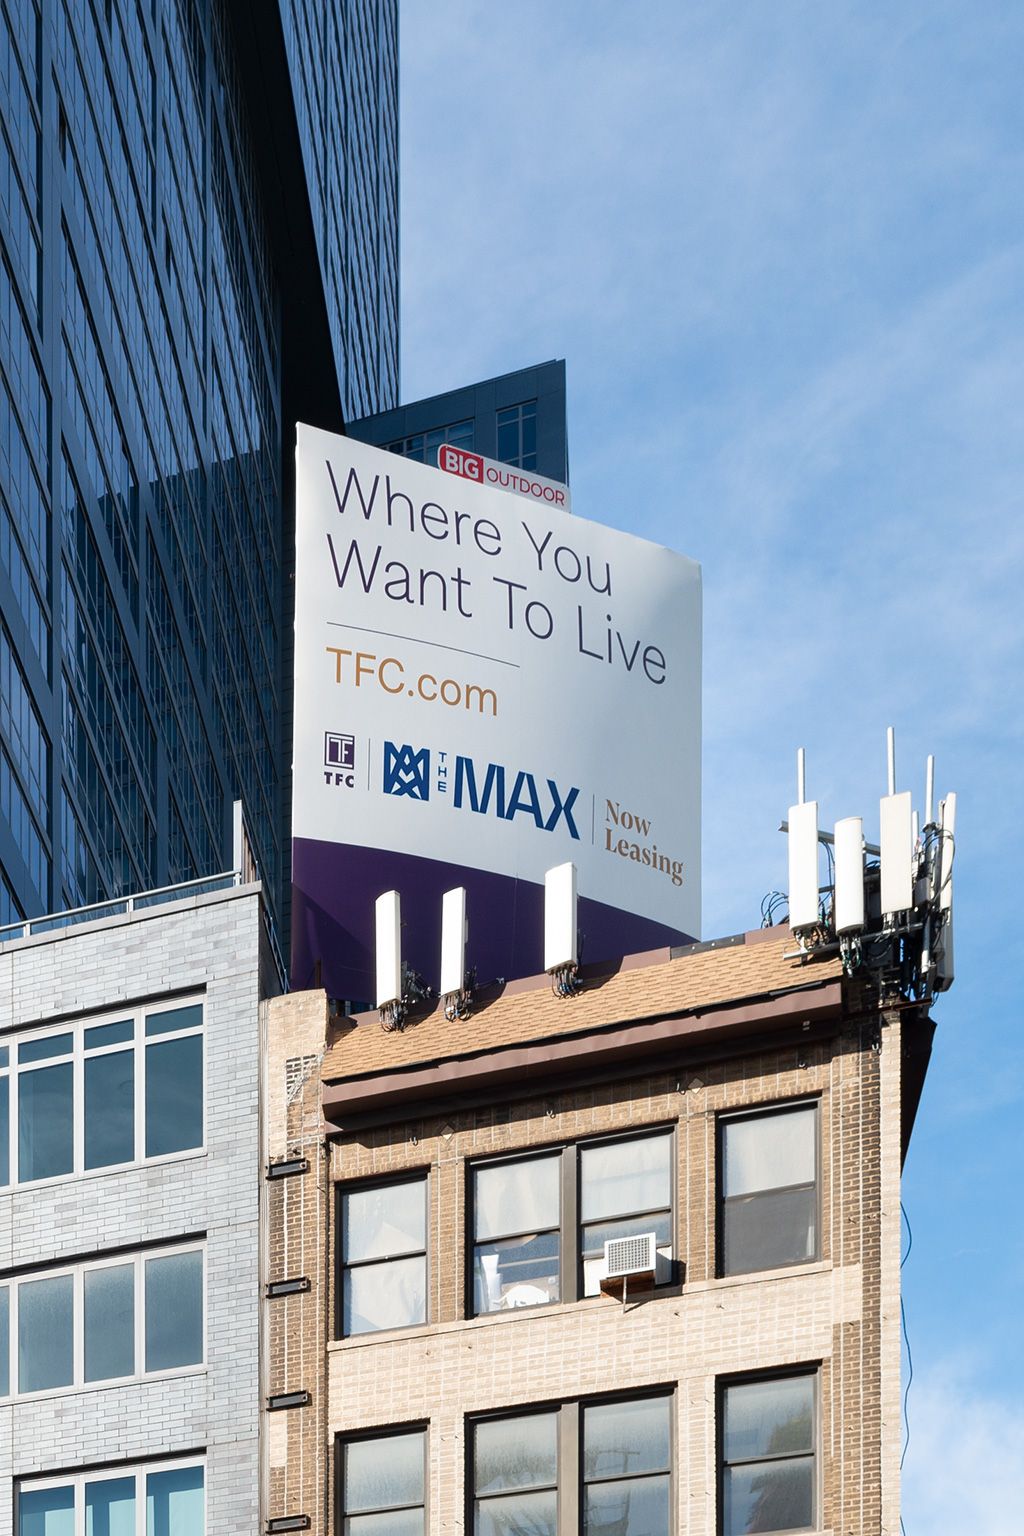 Photograph of a billboard on top of a building in NYC during the day